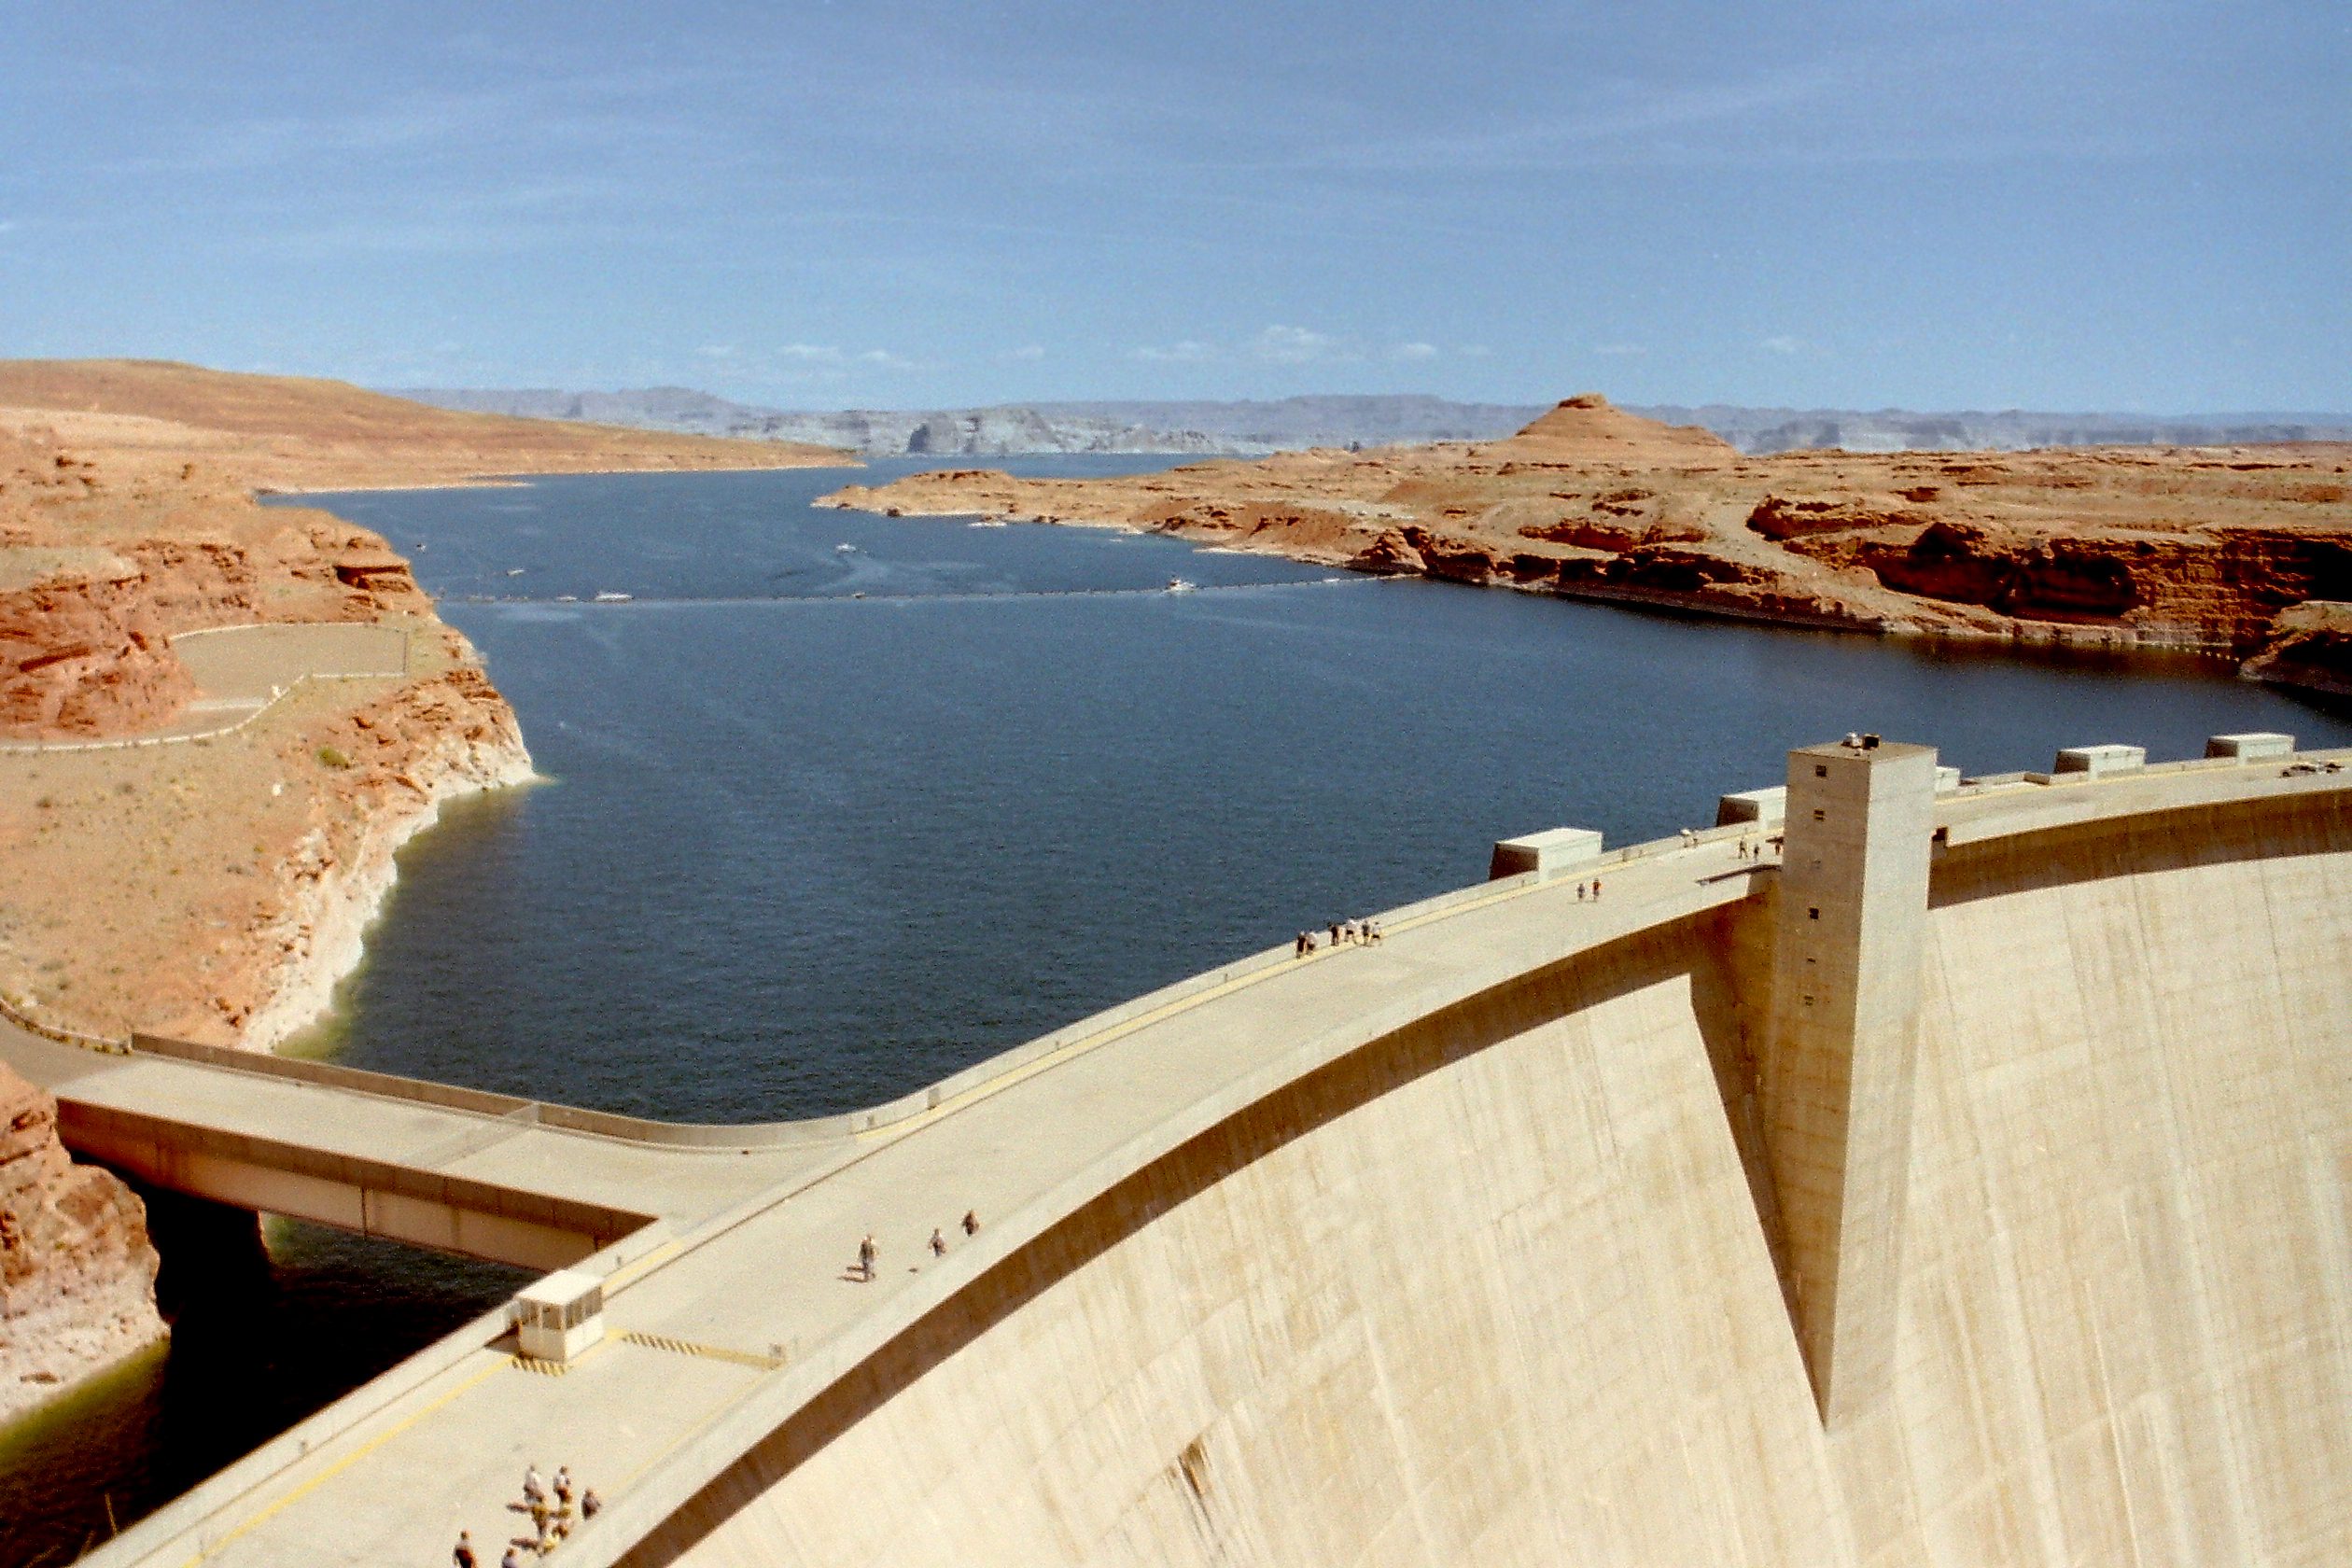 The US Bureau of Reclamation warns of risks to Glen Canyon Dam's water release system if Lake Powell's water level drops too low.